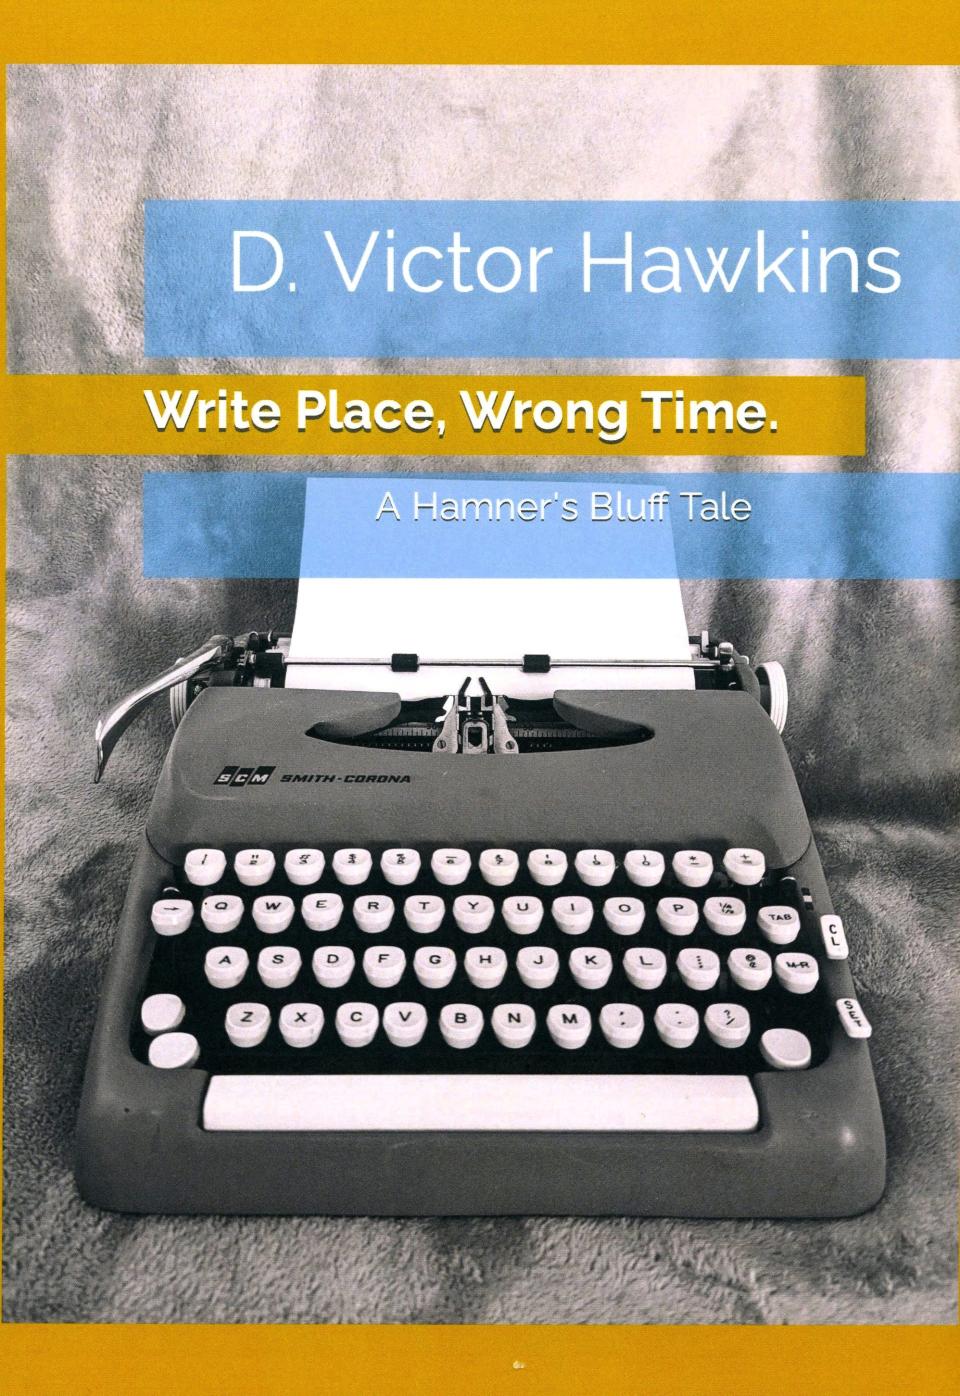 'Write Place, Wrong Time' is the new novel now available by author and former Jackson broadcaster D. Victor Hawkins.